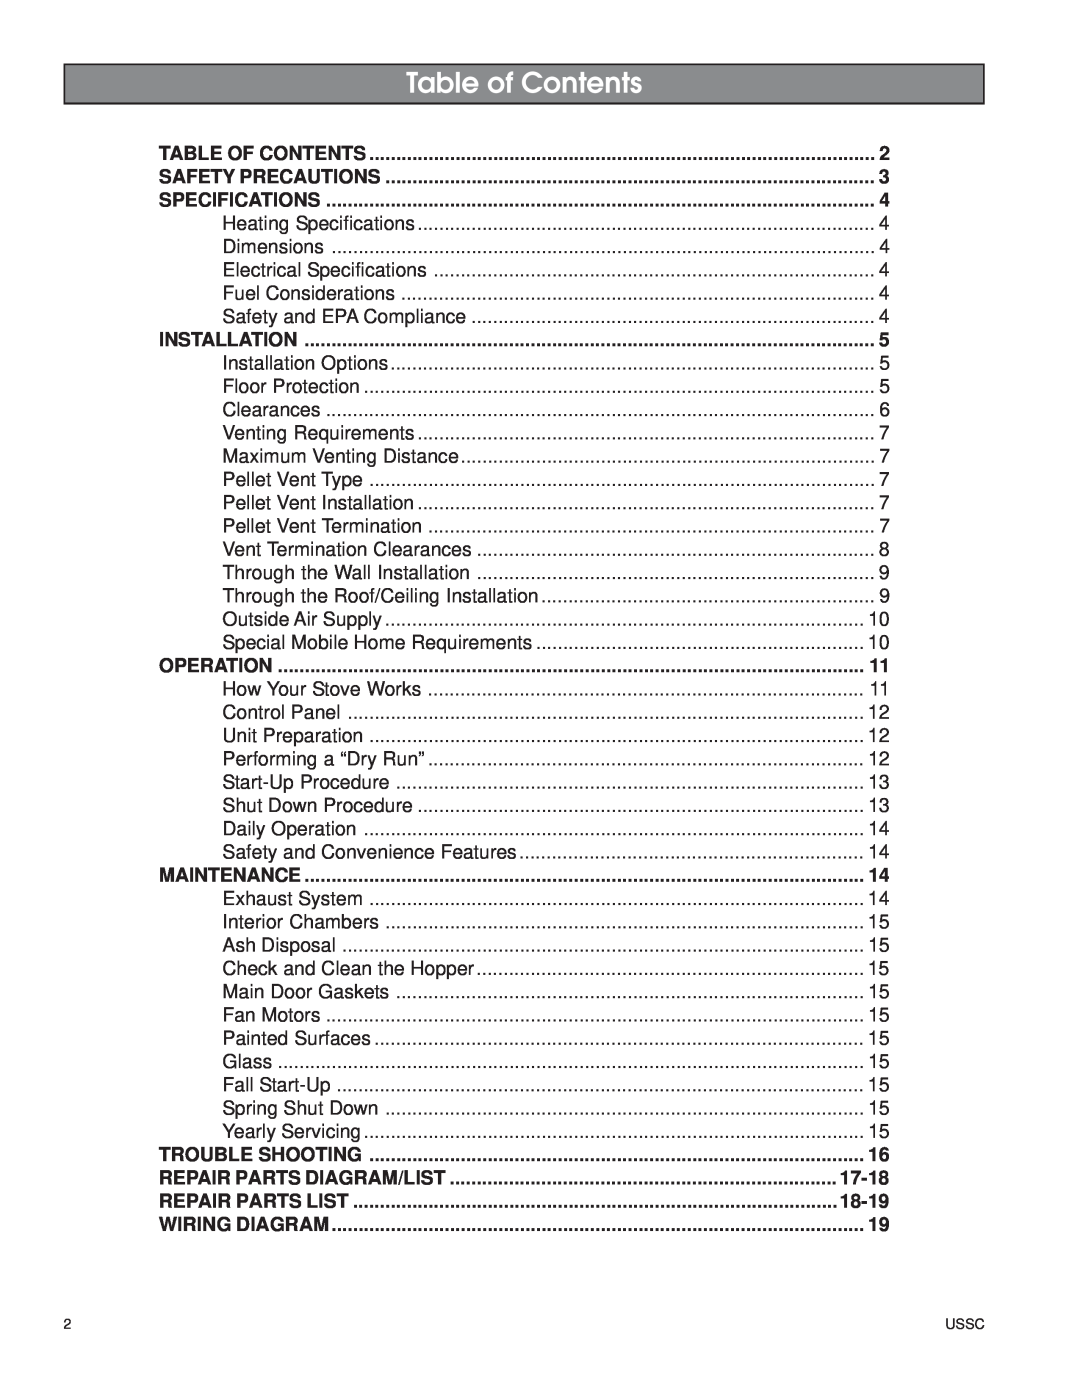 United States Stove 5500XL owner manual Table of Contents, Repair Parts Diagram/List, 17-18, Repair Parts List, 18-19 